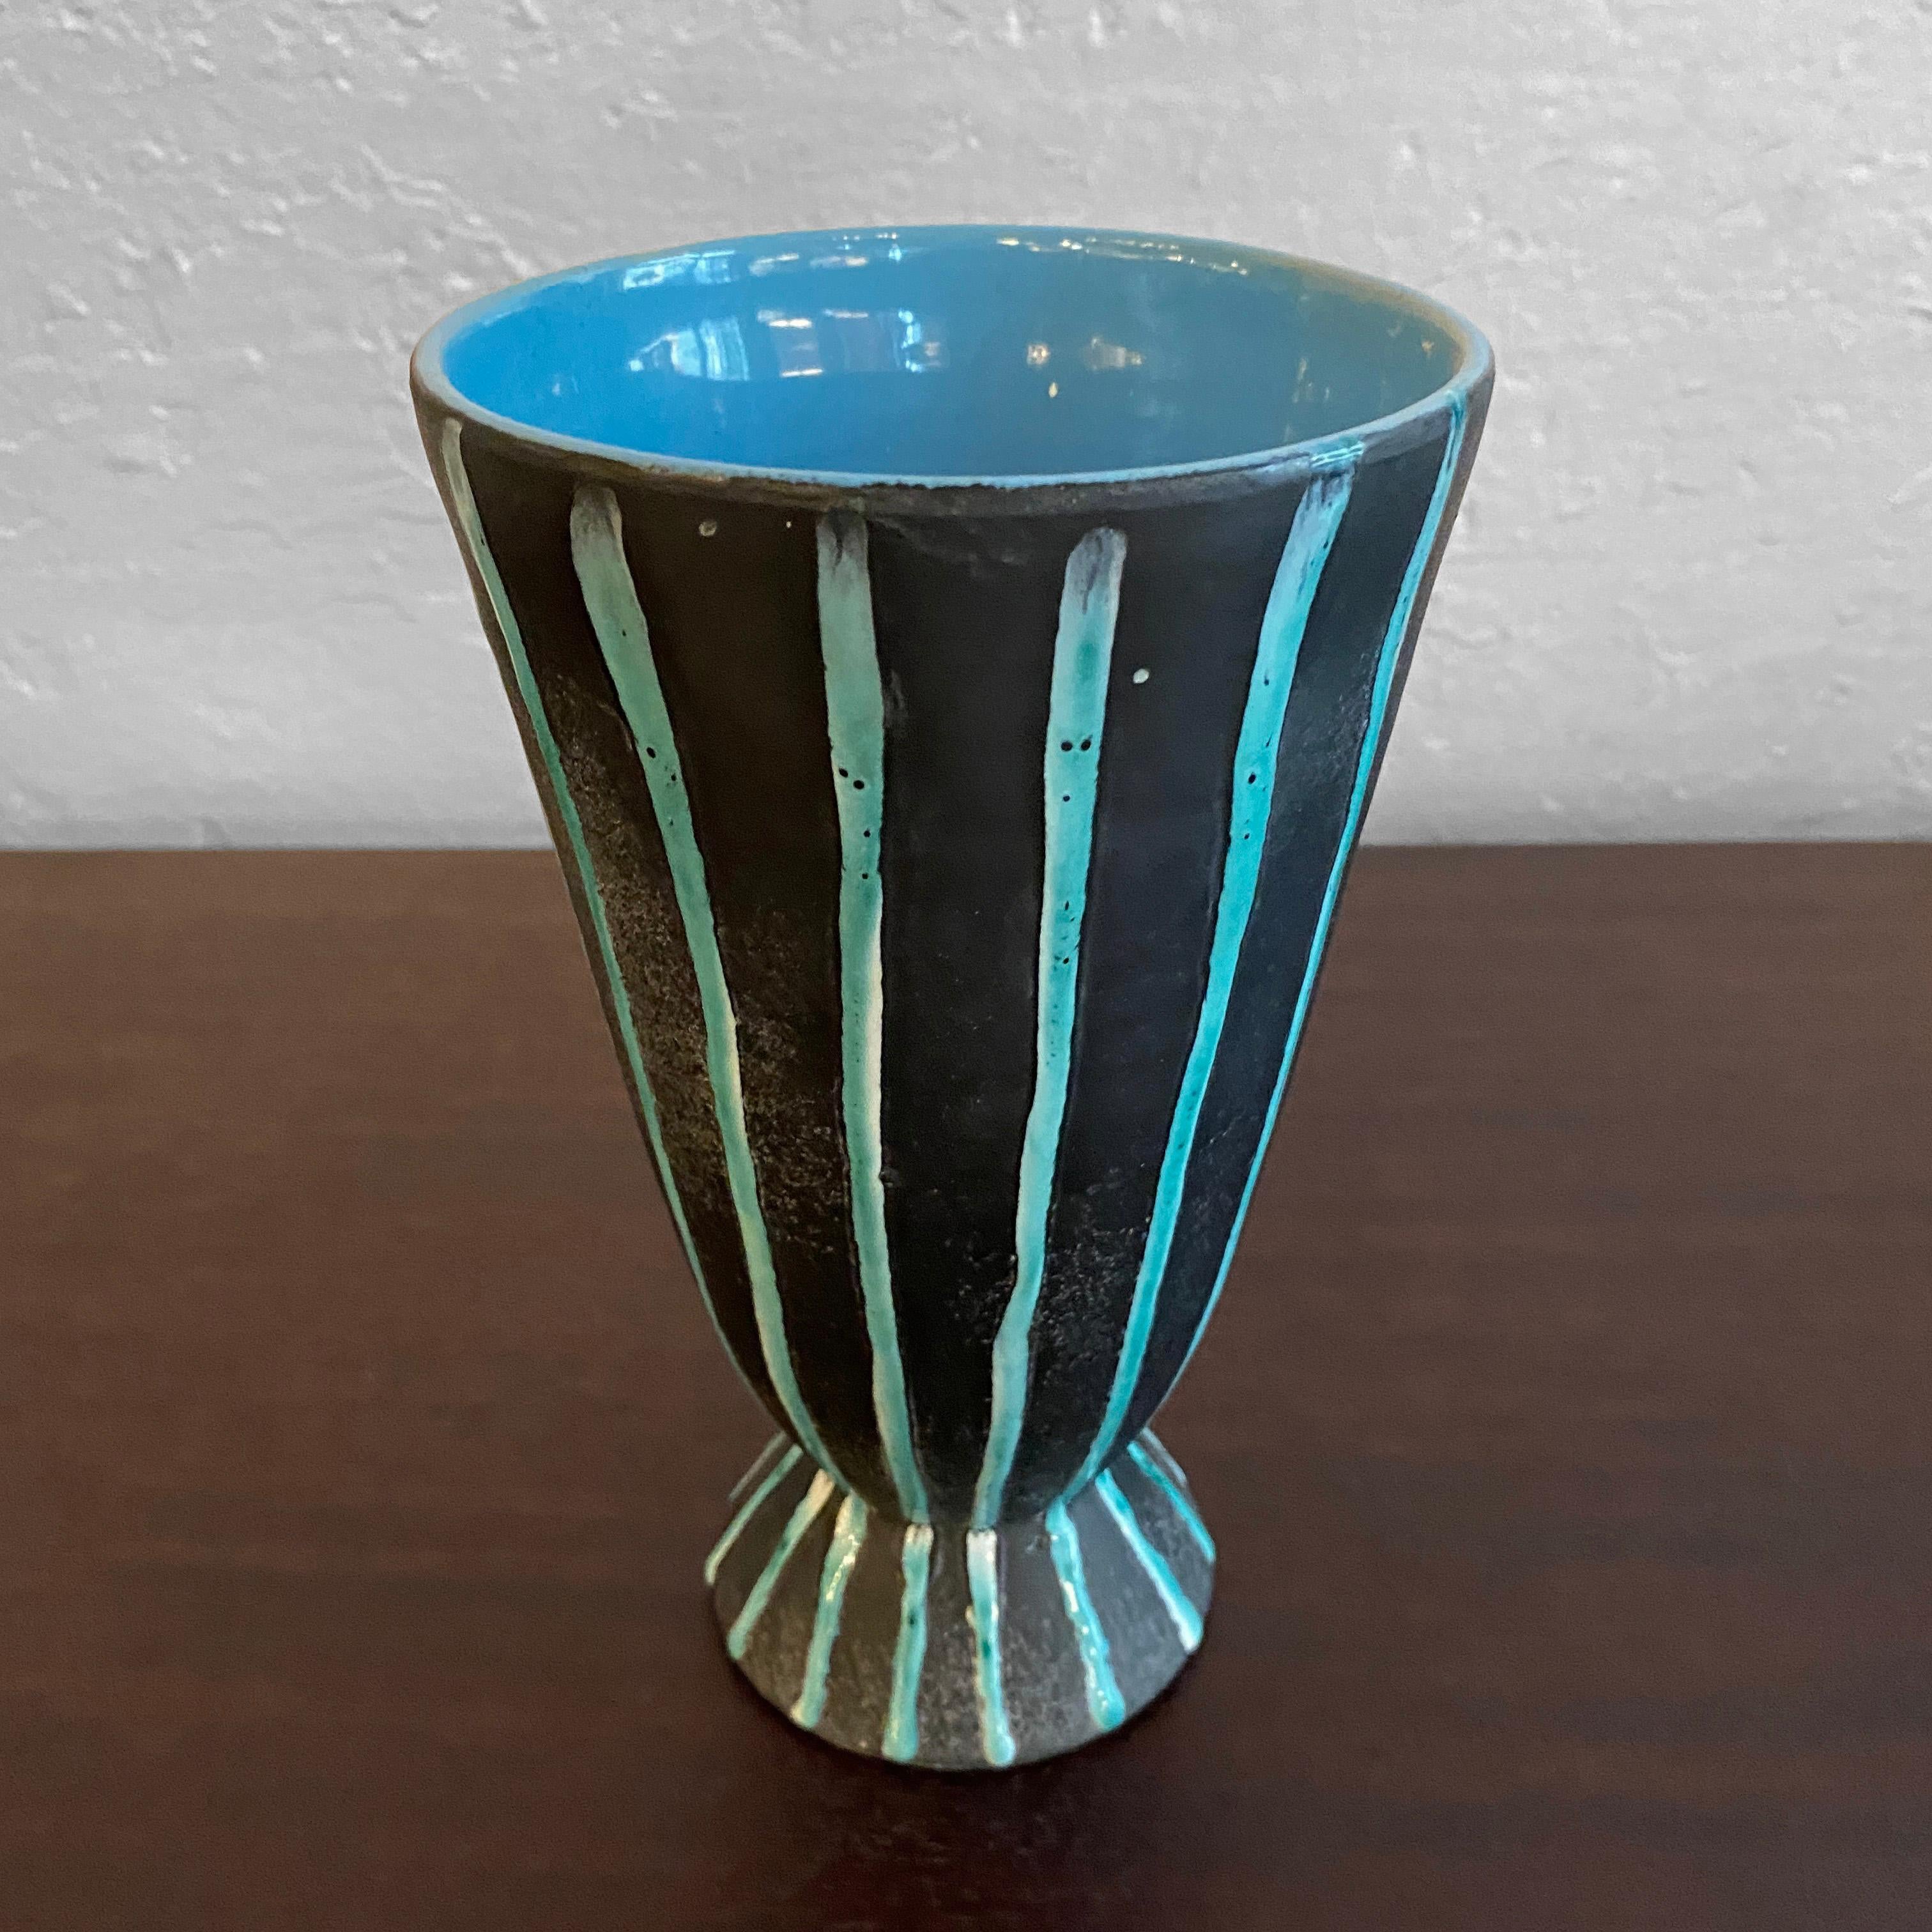 Italian, Mid-Century Modern, art pottery vase by Paul's Of Italy features a chalis shaped body with striking, black and blue stripe, matte glaze. Interior is blue.